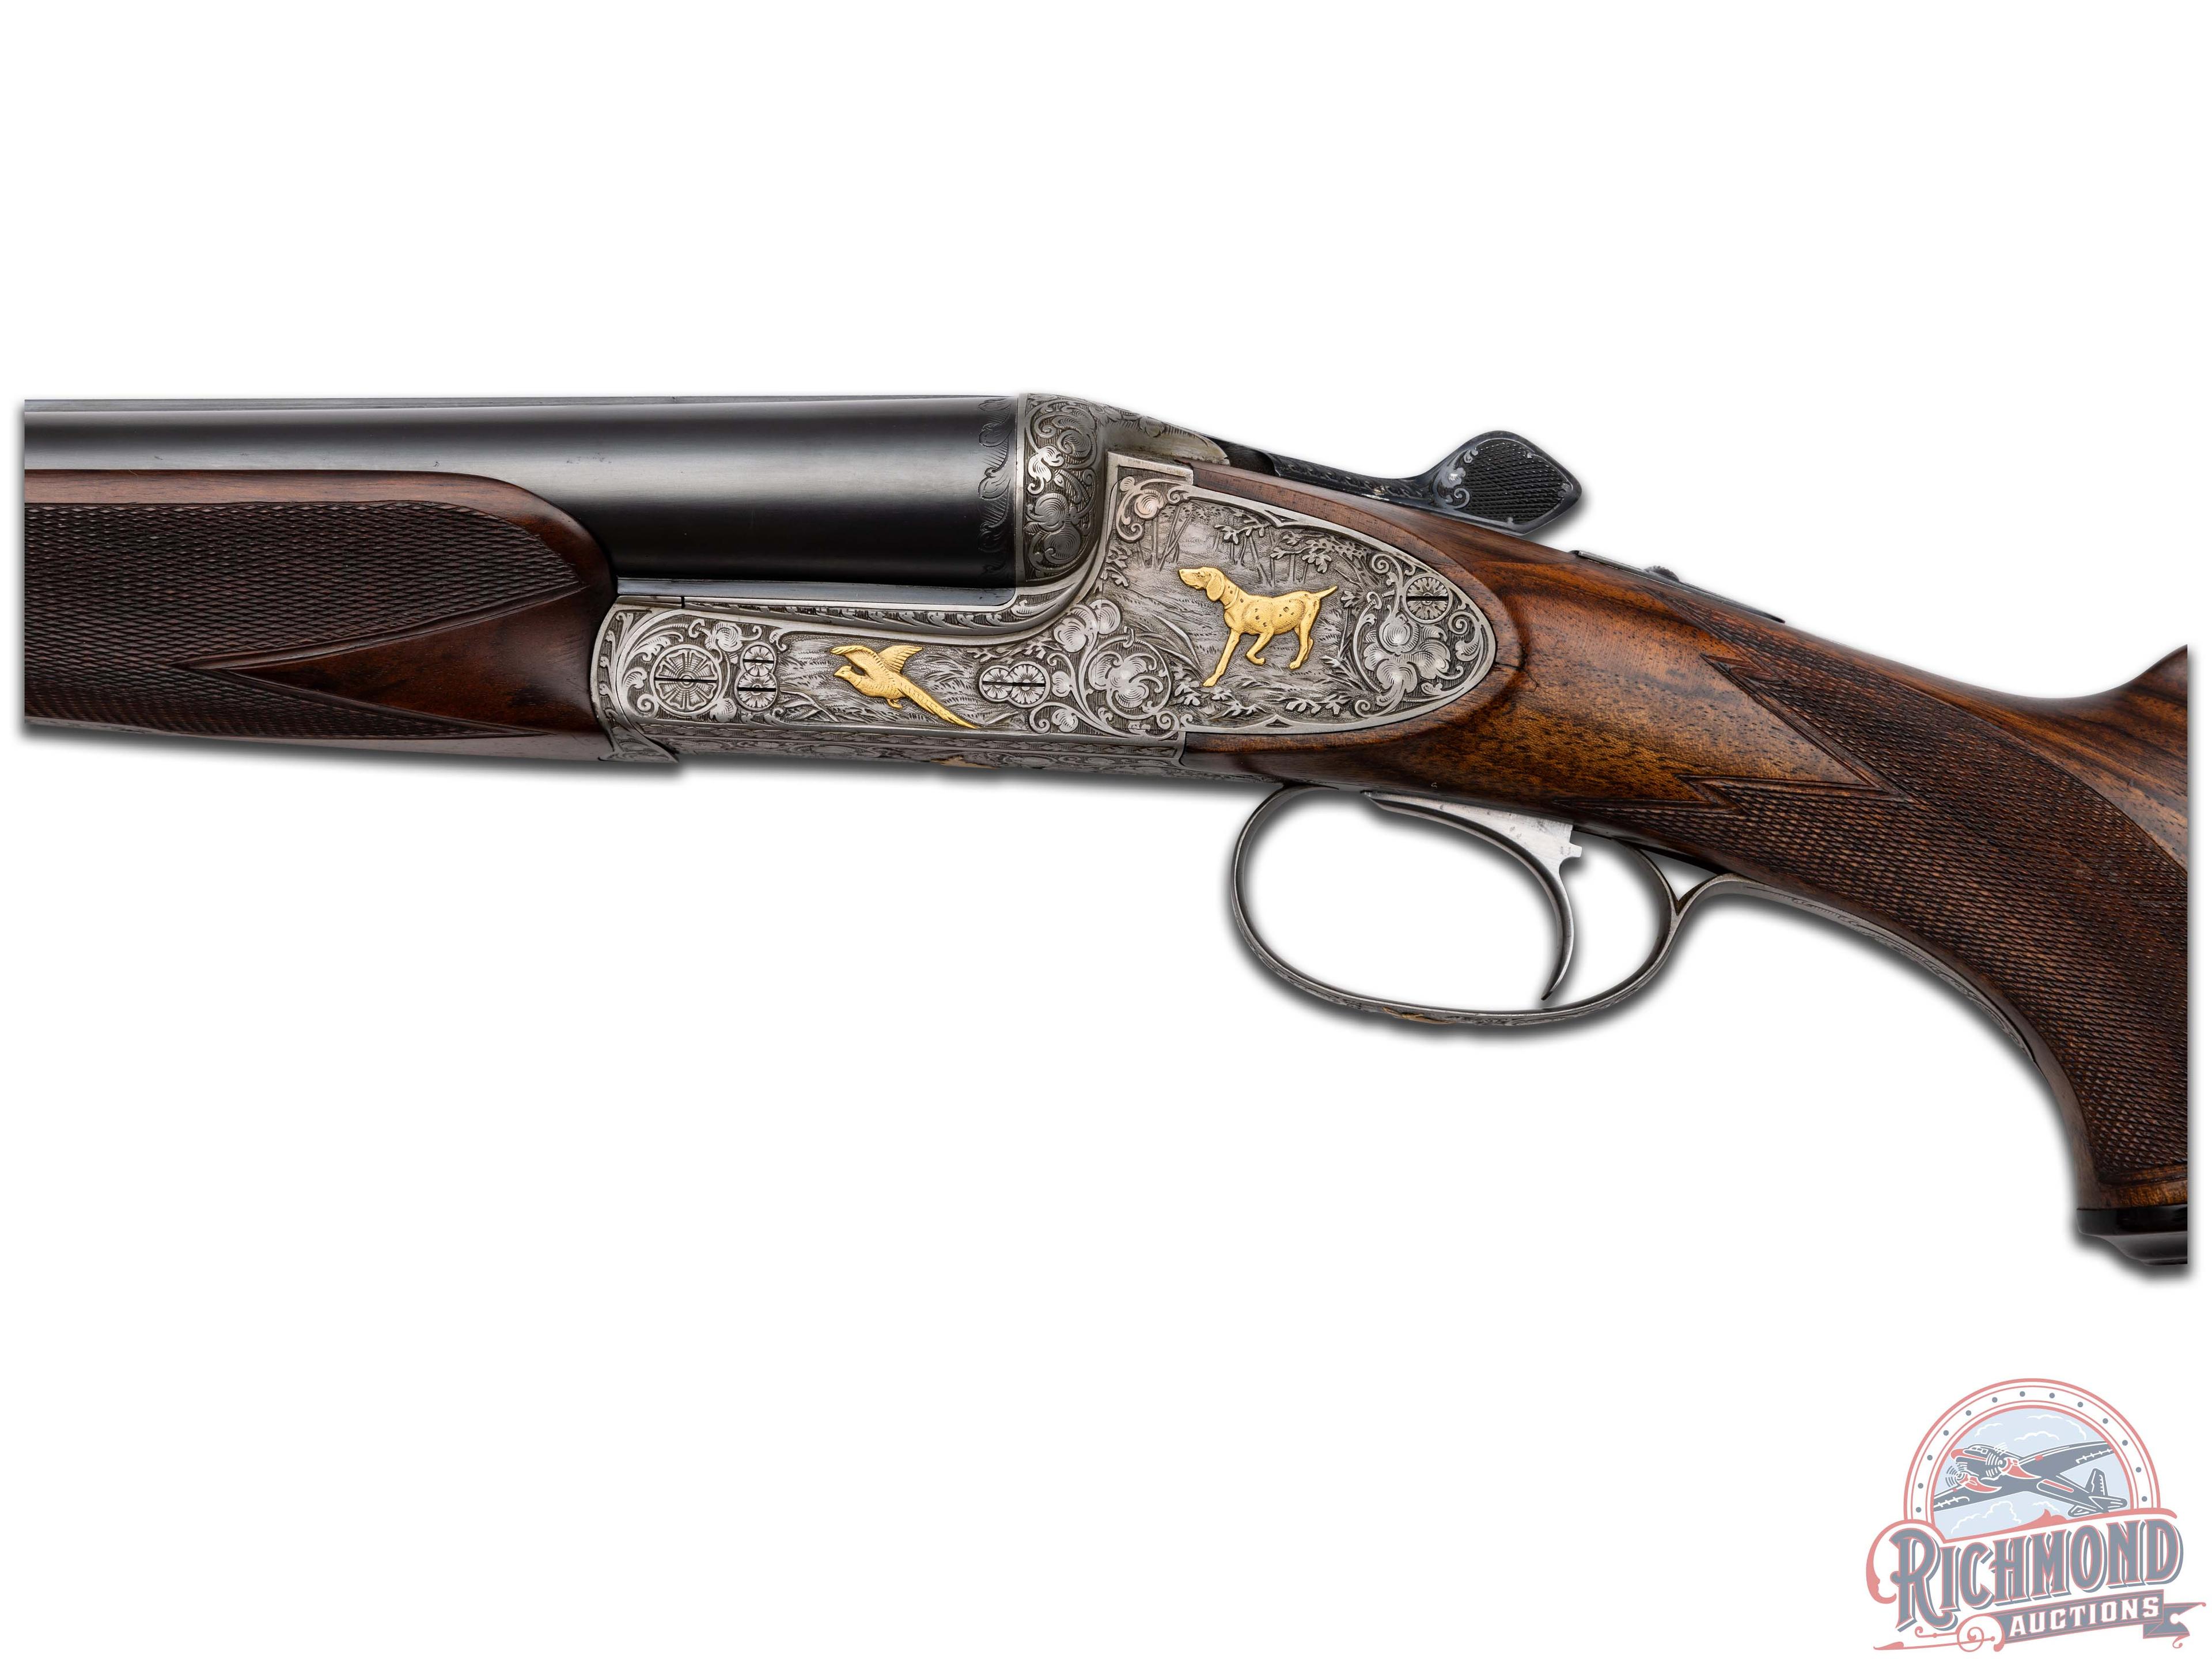 Finely Engraved 1959 Ferlach Sidedplated 12 Gauge Boxlock Double Barrel Game Shotgun with Case